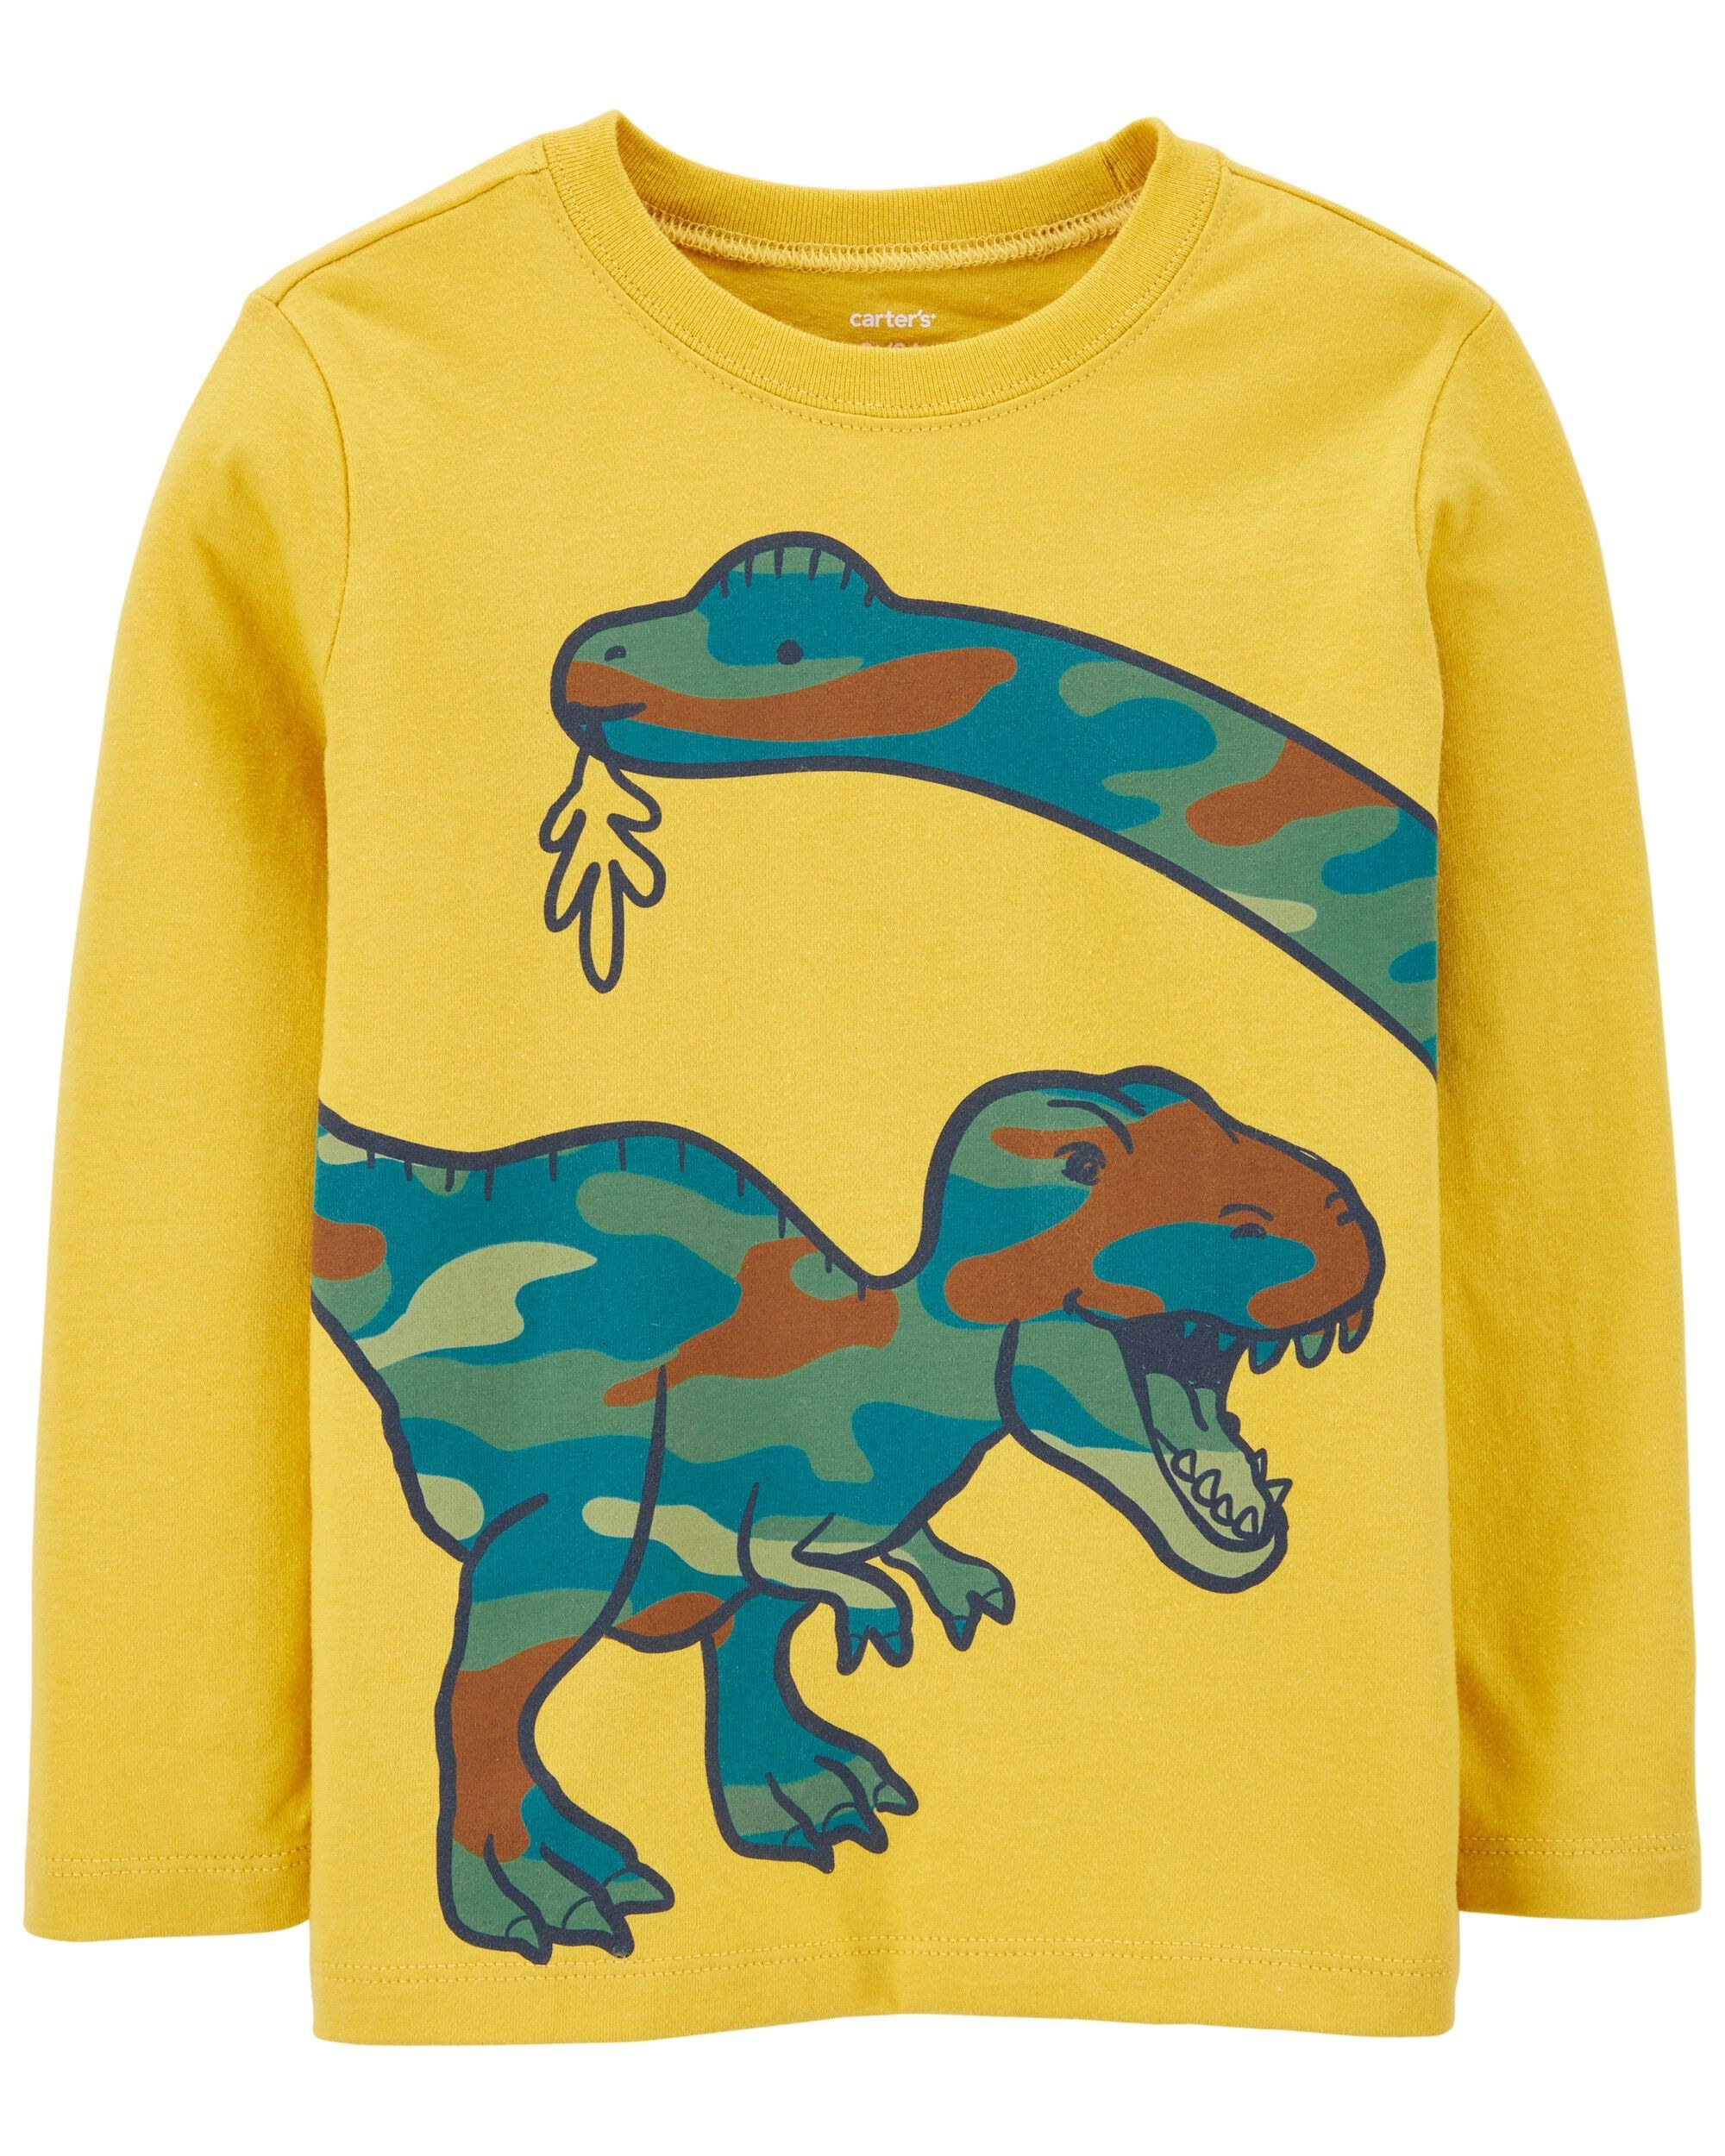 yellow long-sleeve shirt with dinosaurs on them